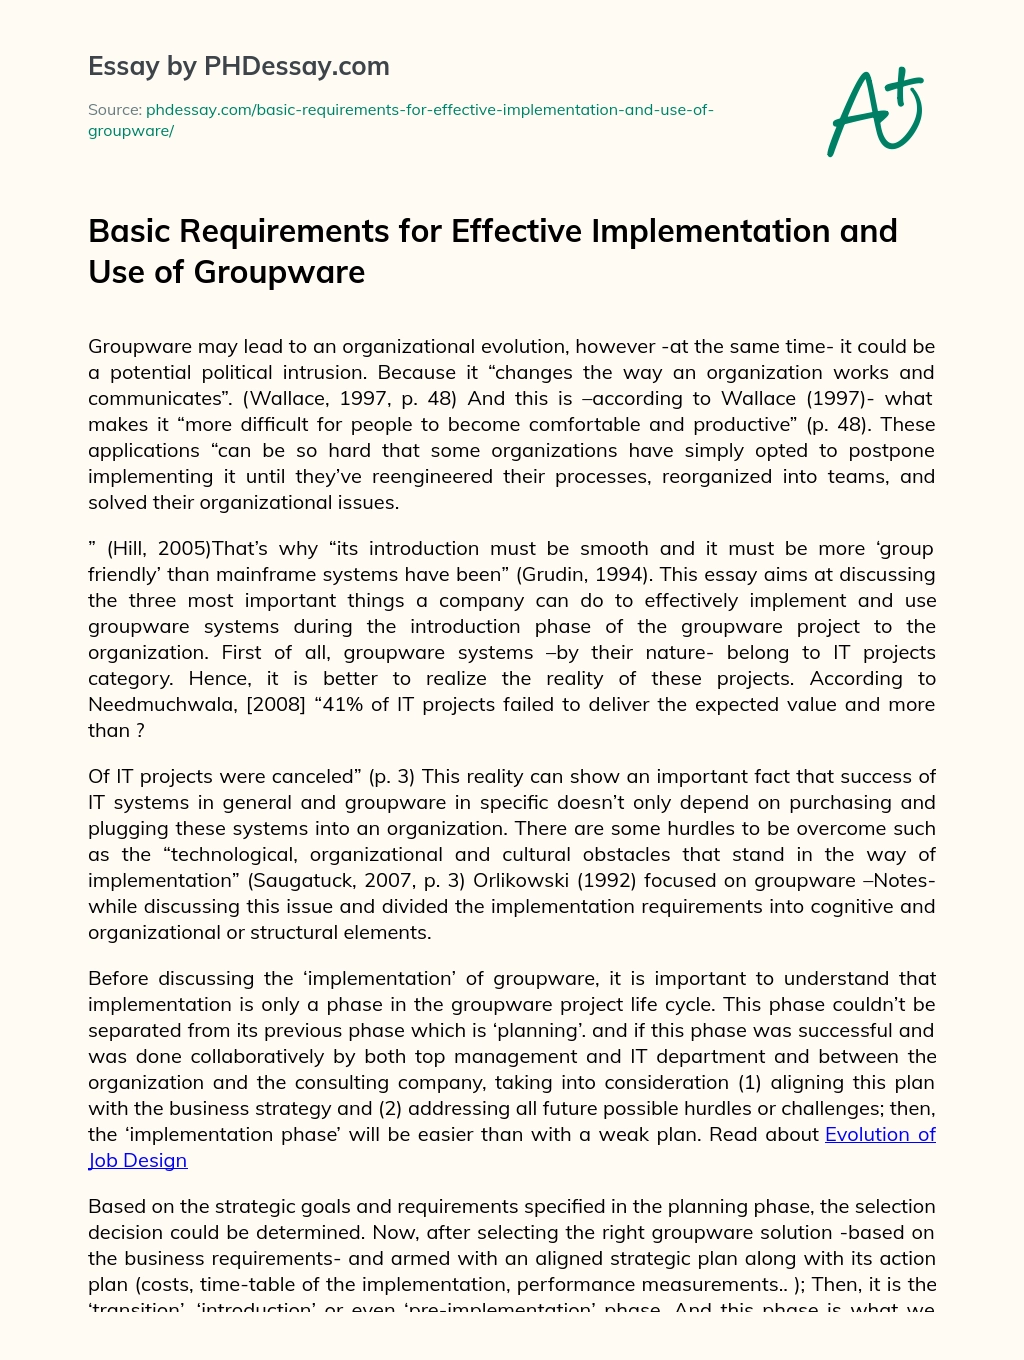 Basic Requirements for  Effective Implementation and Use of Groupware essay